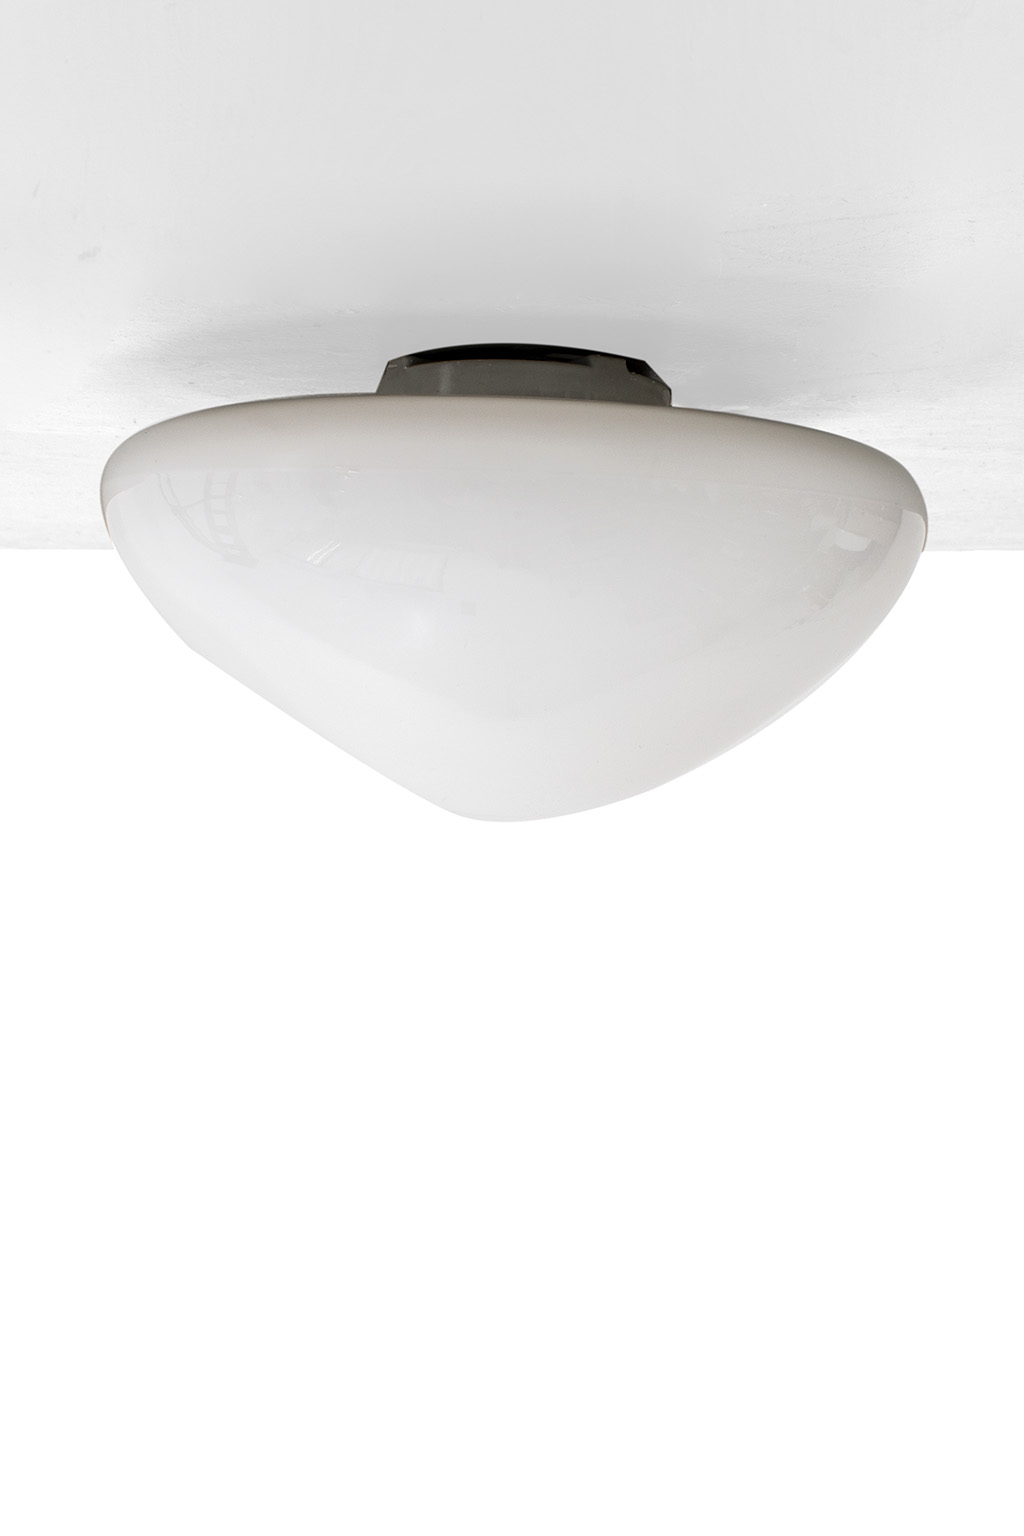 Wilhelm Wagenfeld for Linder ceiling lamp